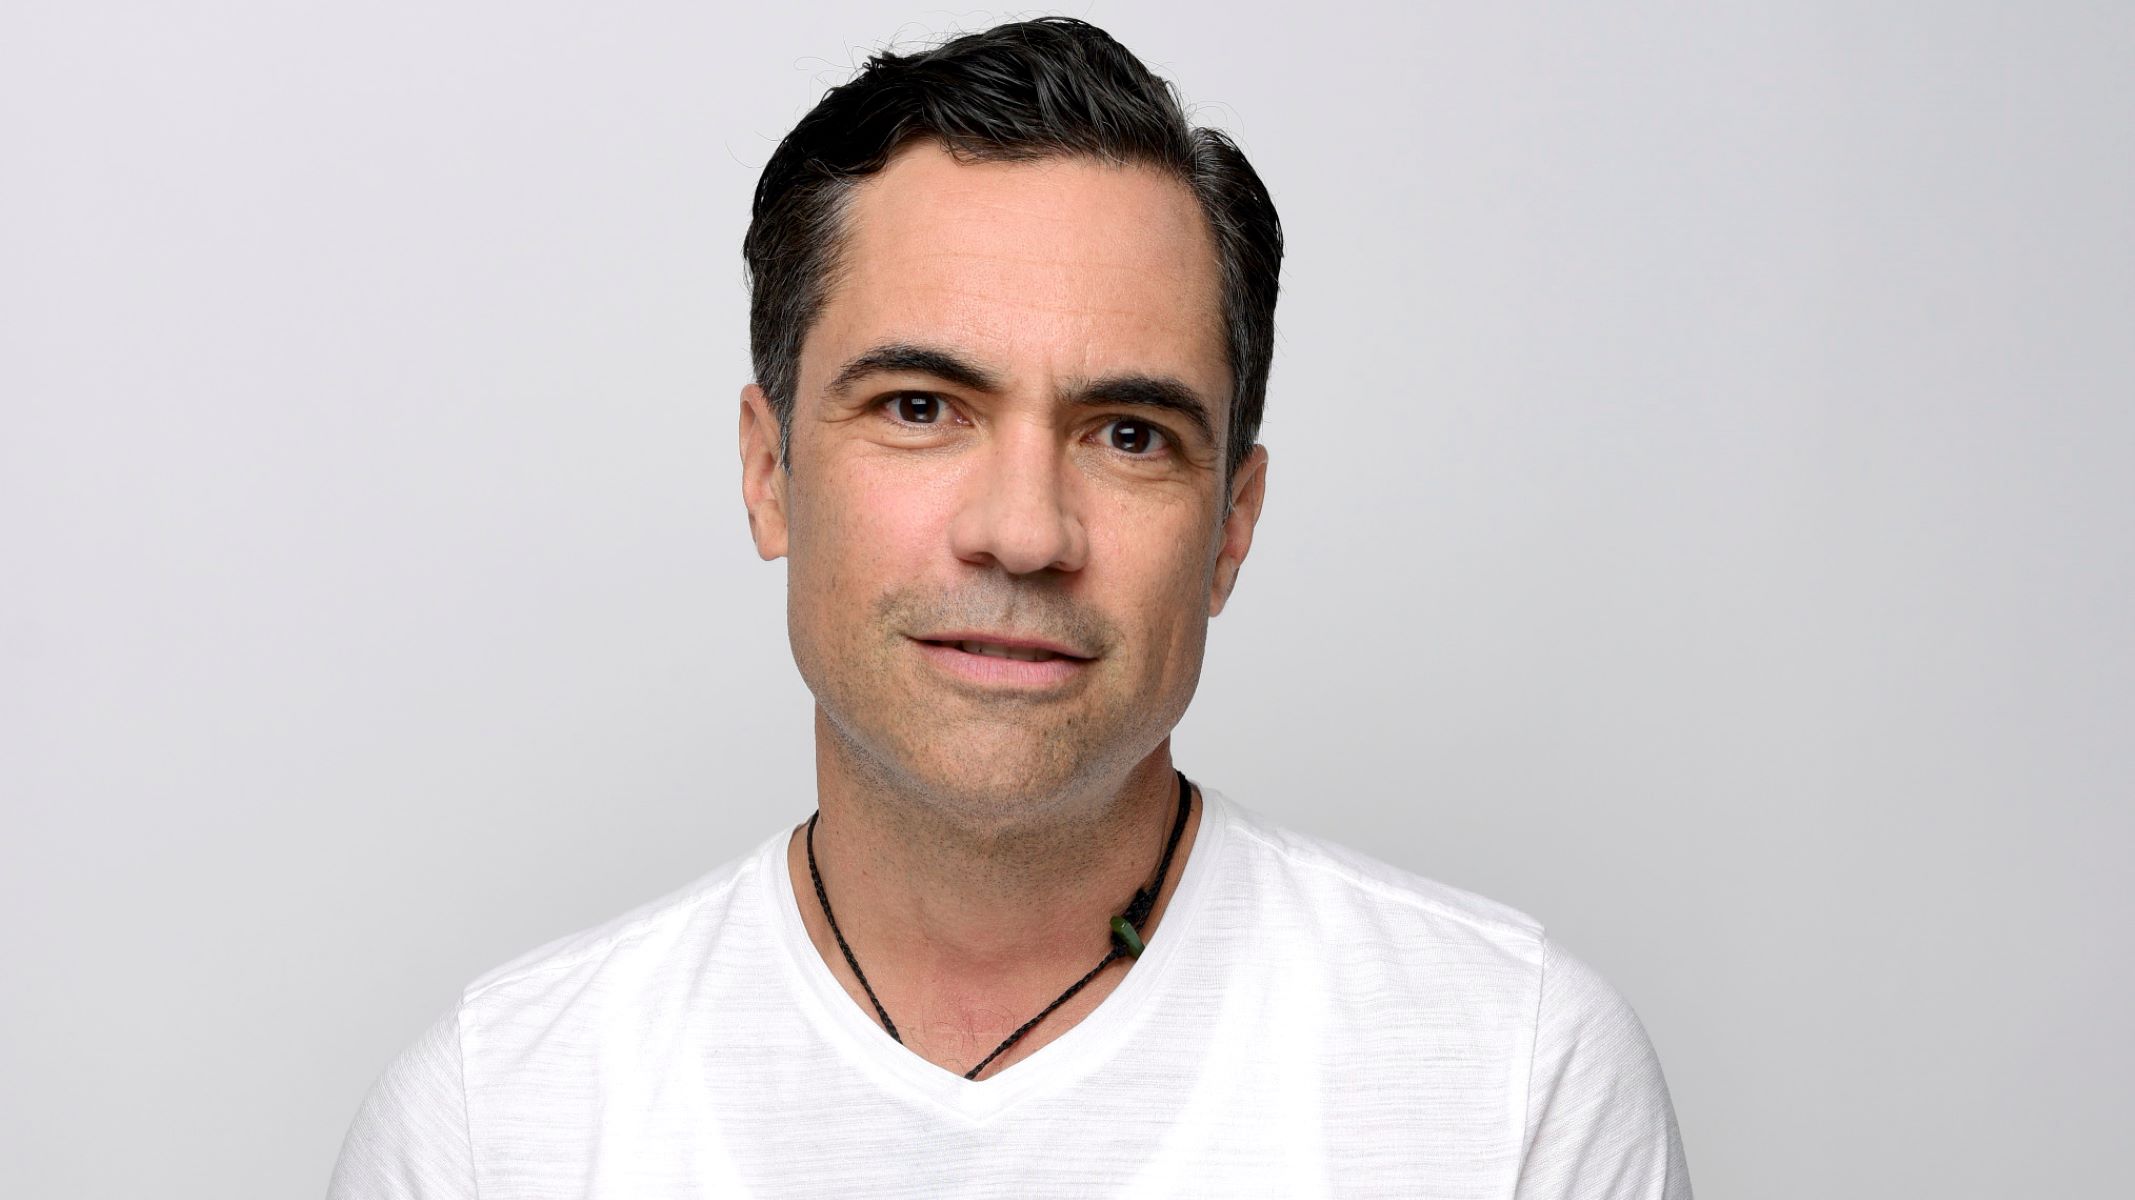 25-astounding-facts-about-danny-pino